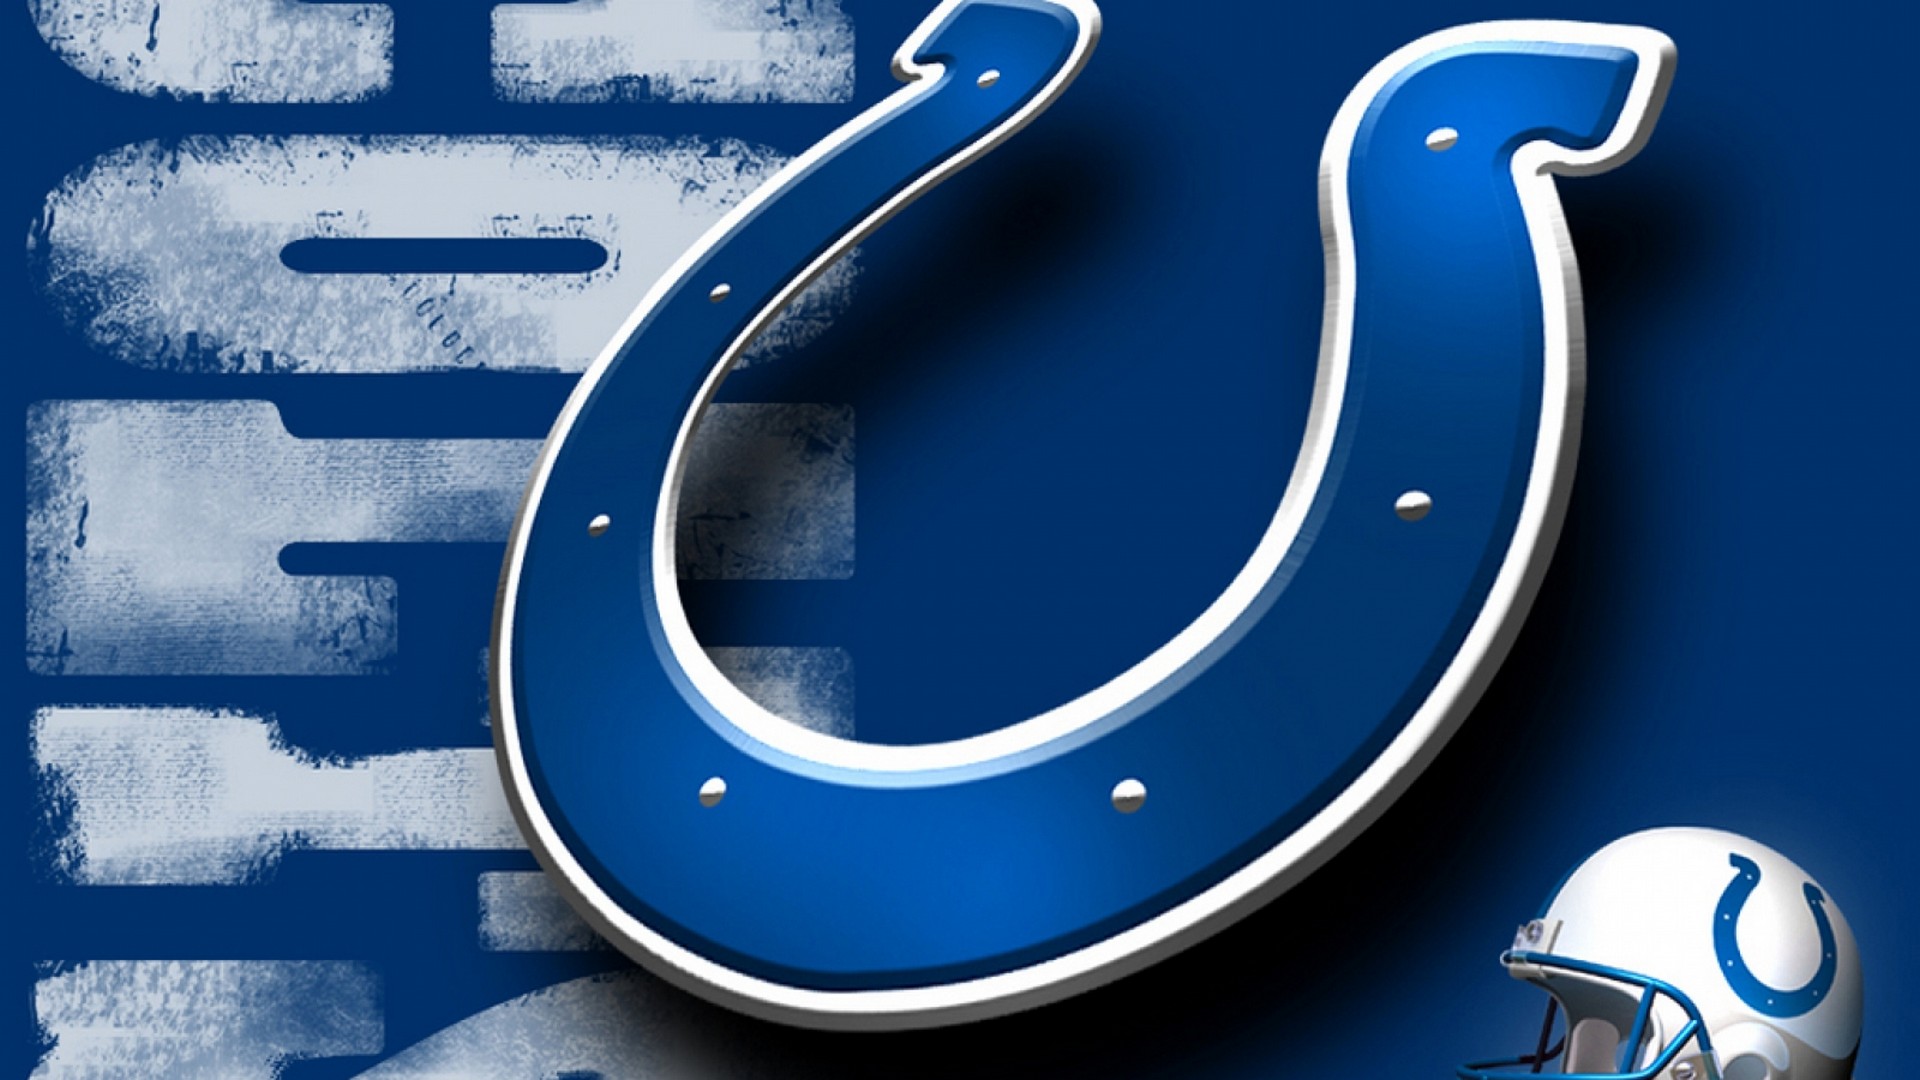 Wallpapers HD Indianapolis Colts NFL with resolution 1920x1080 pixel. You can make this wallpaper for your Mac or Windows Desktop Background, iPhone, Android or Tablet and another Smartphone device